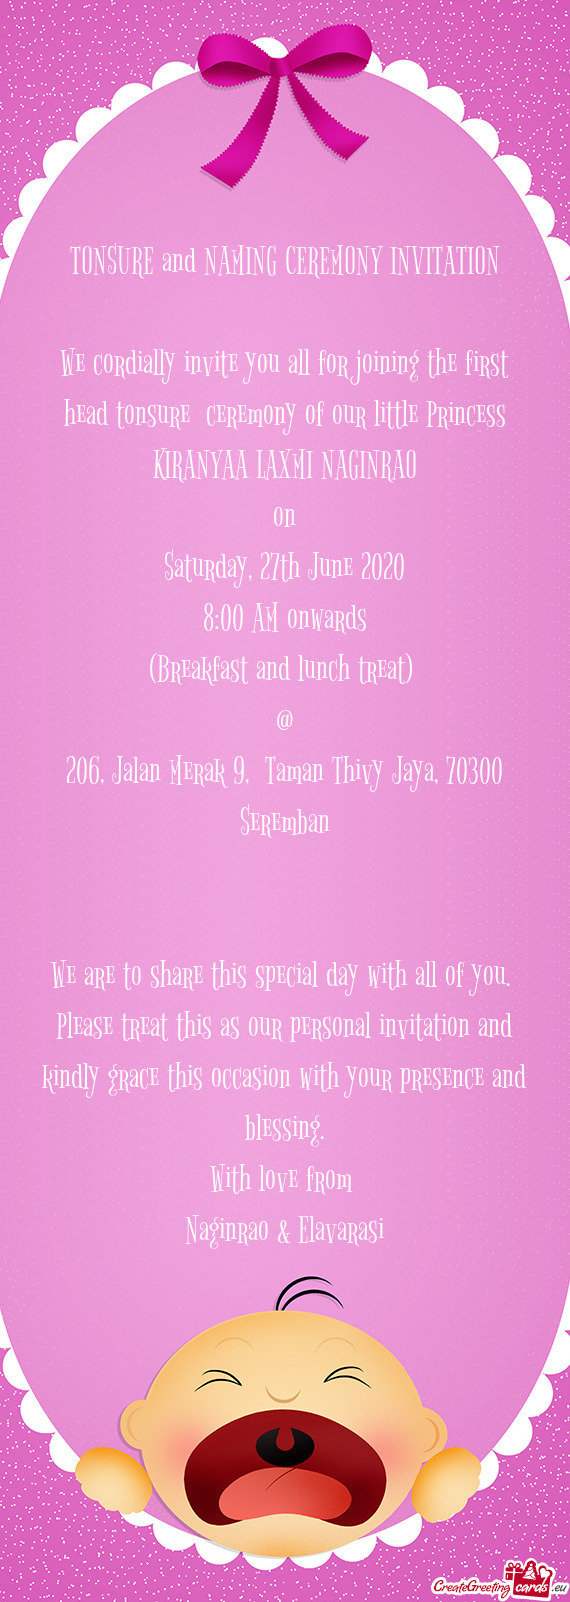 TONSURE and NAMING CEREMONY INVITATION